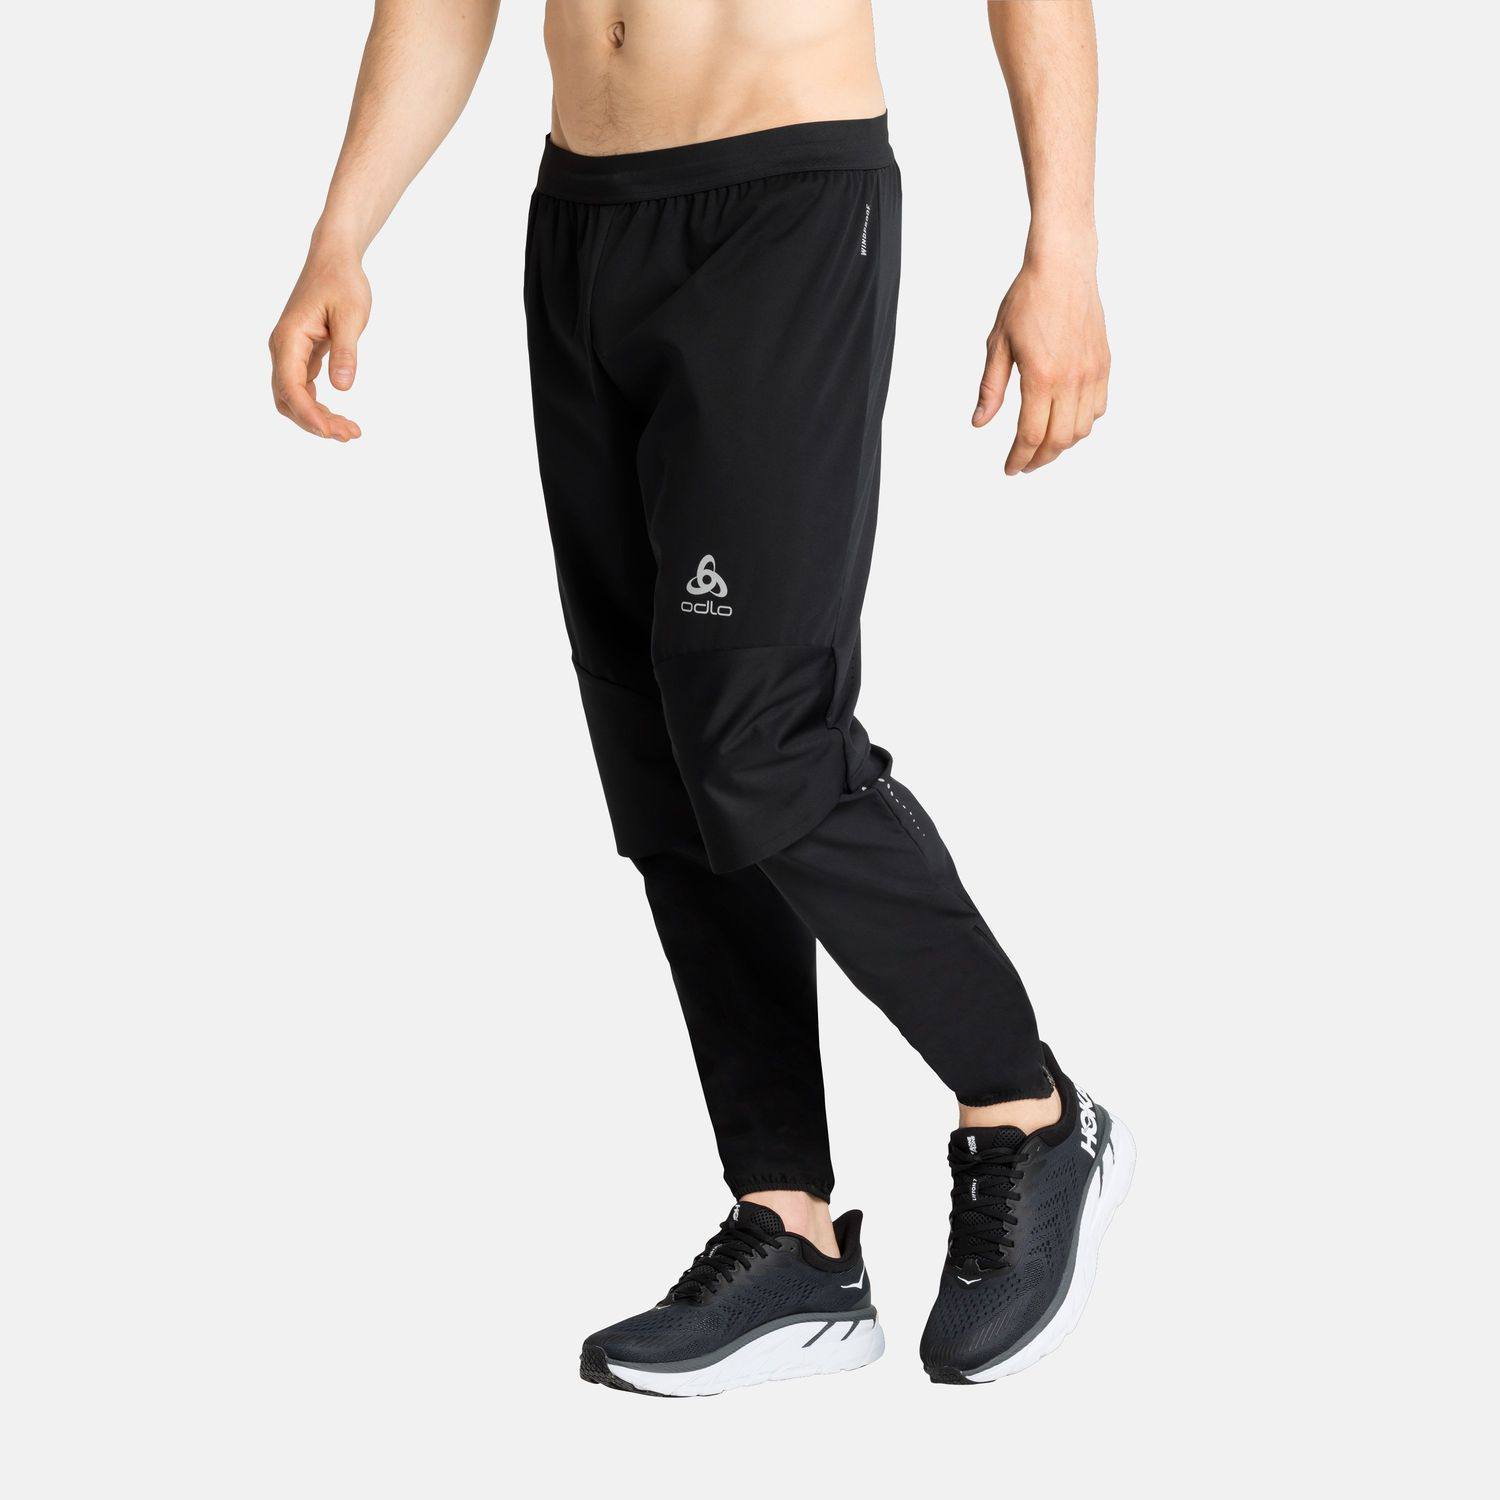 The Zeroweight Warm Pants Black XL